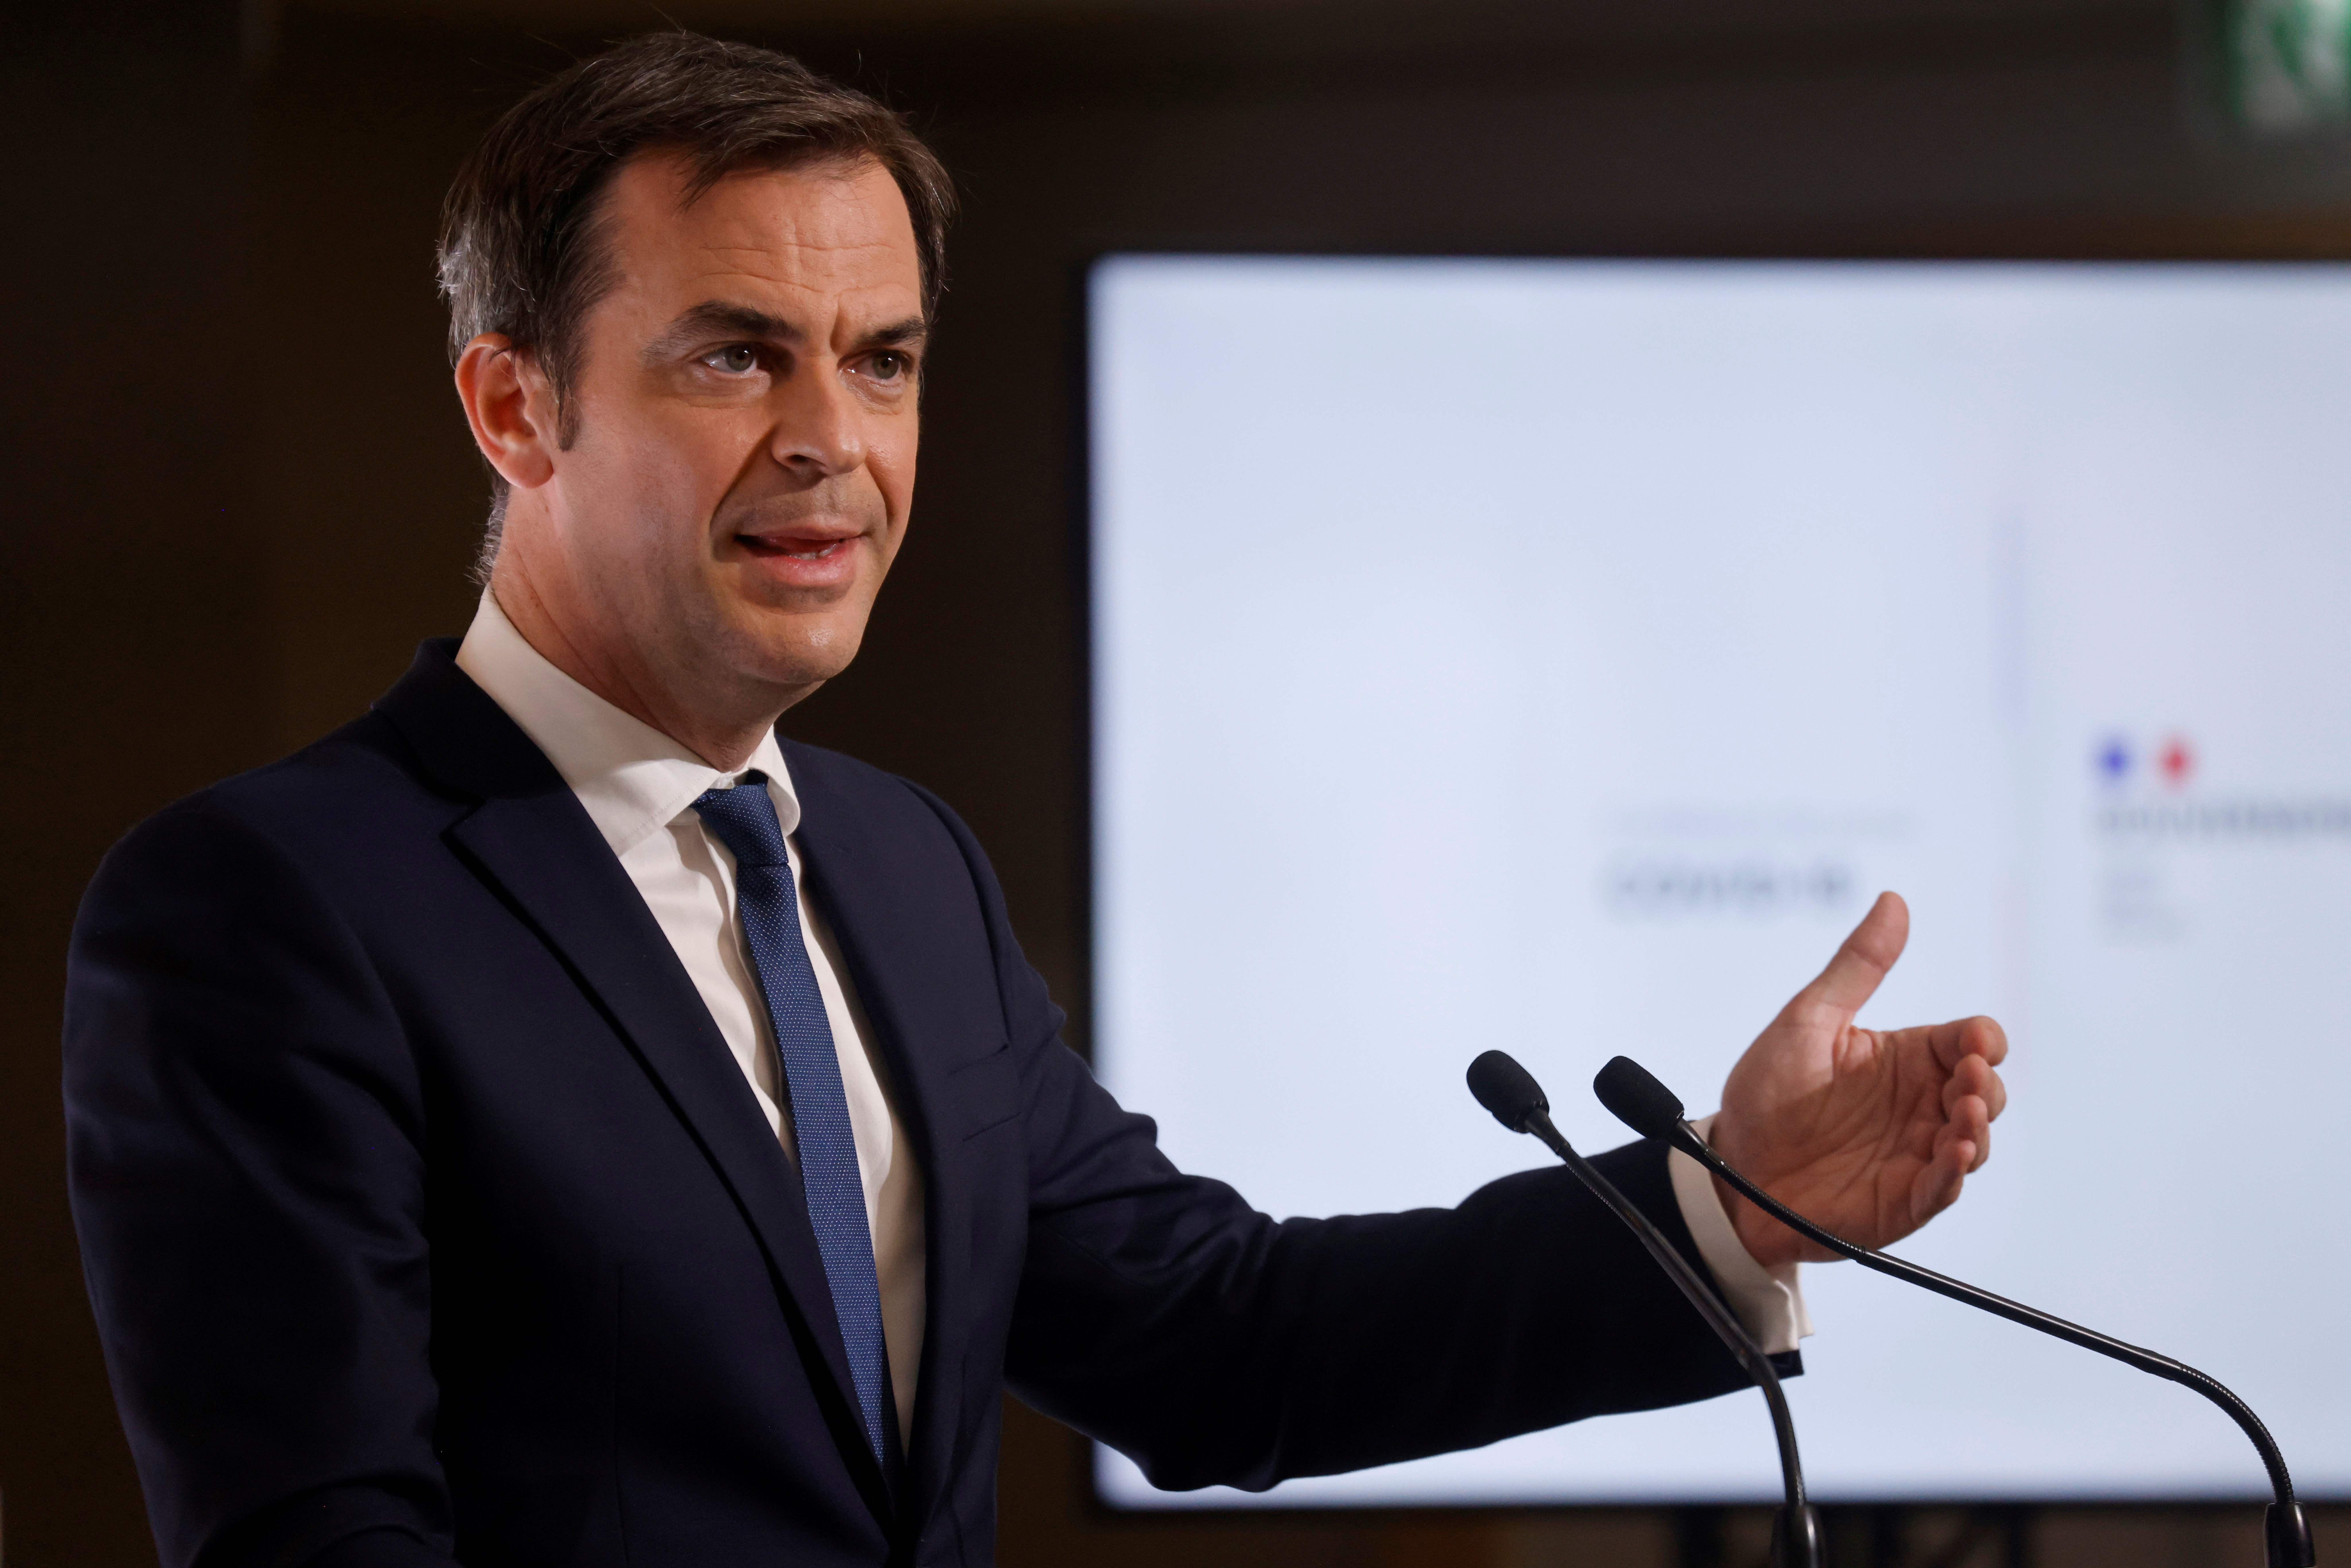 French PM Castex holds news conference on COVID-19 strategy, Paris